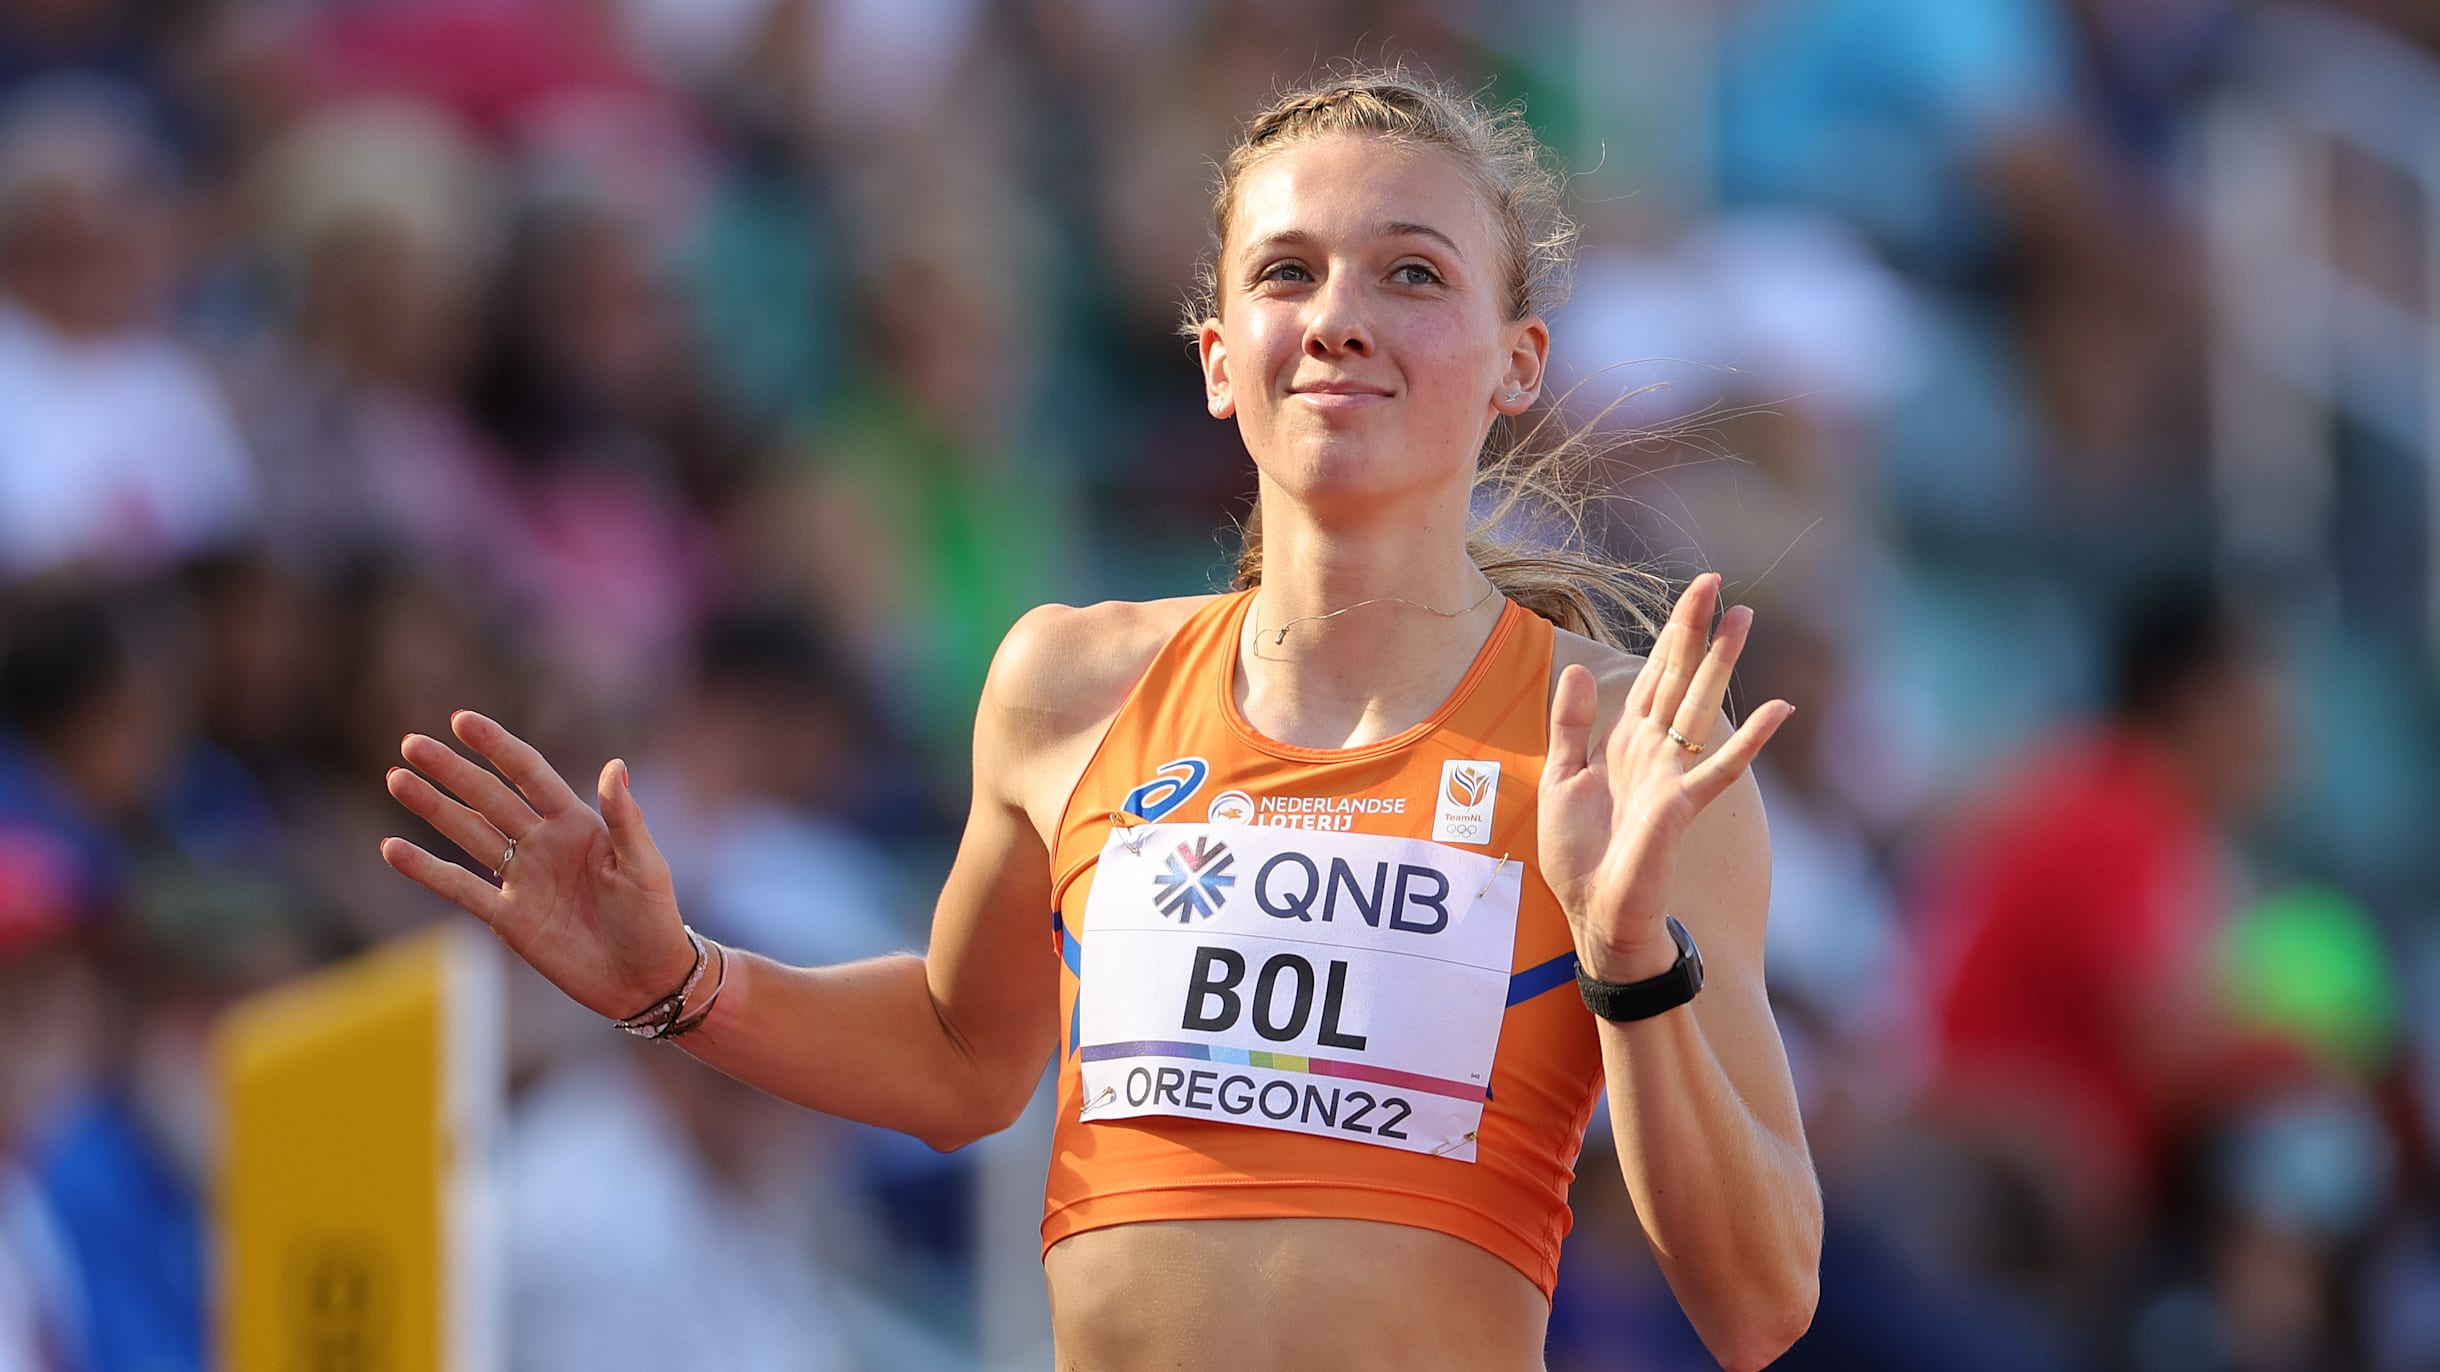 Femke Bol is attempting a double in the 400m and 400m hurdles at